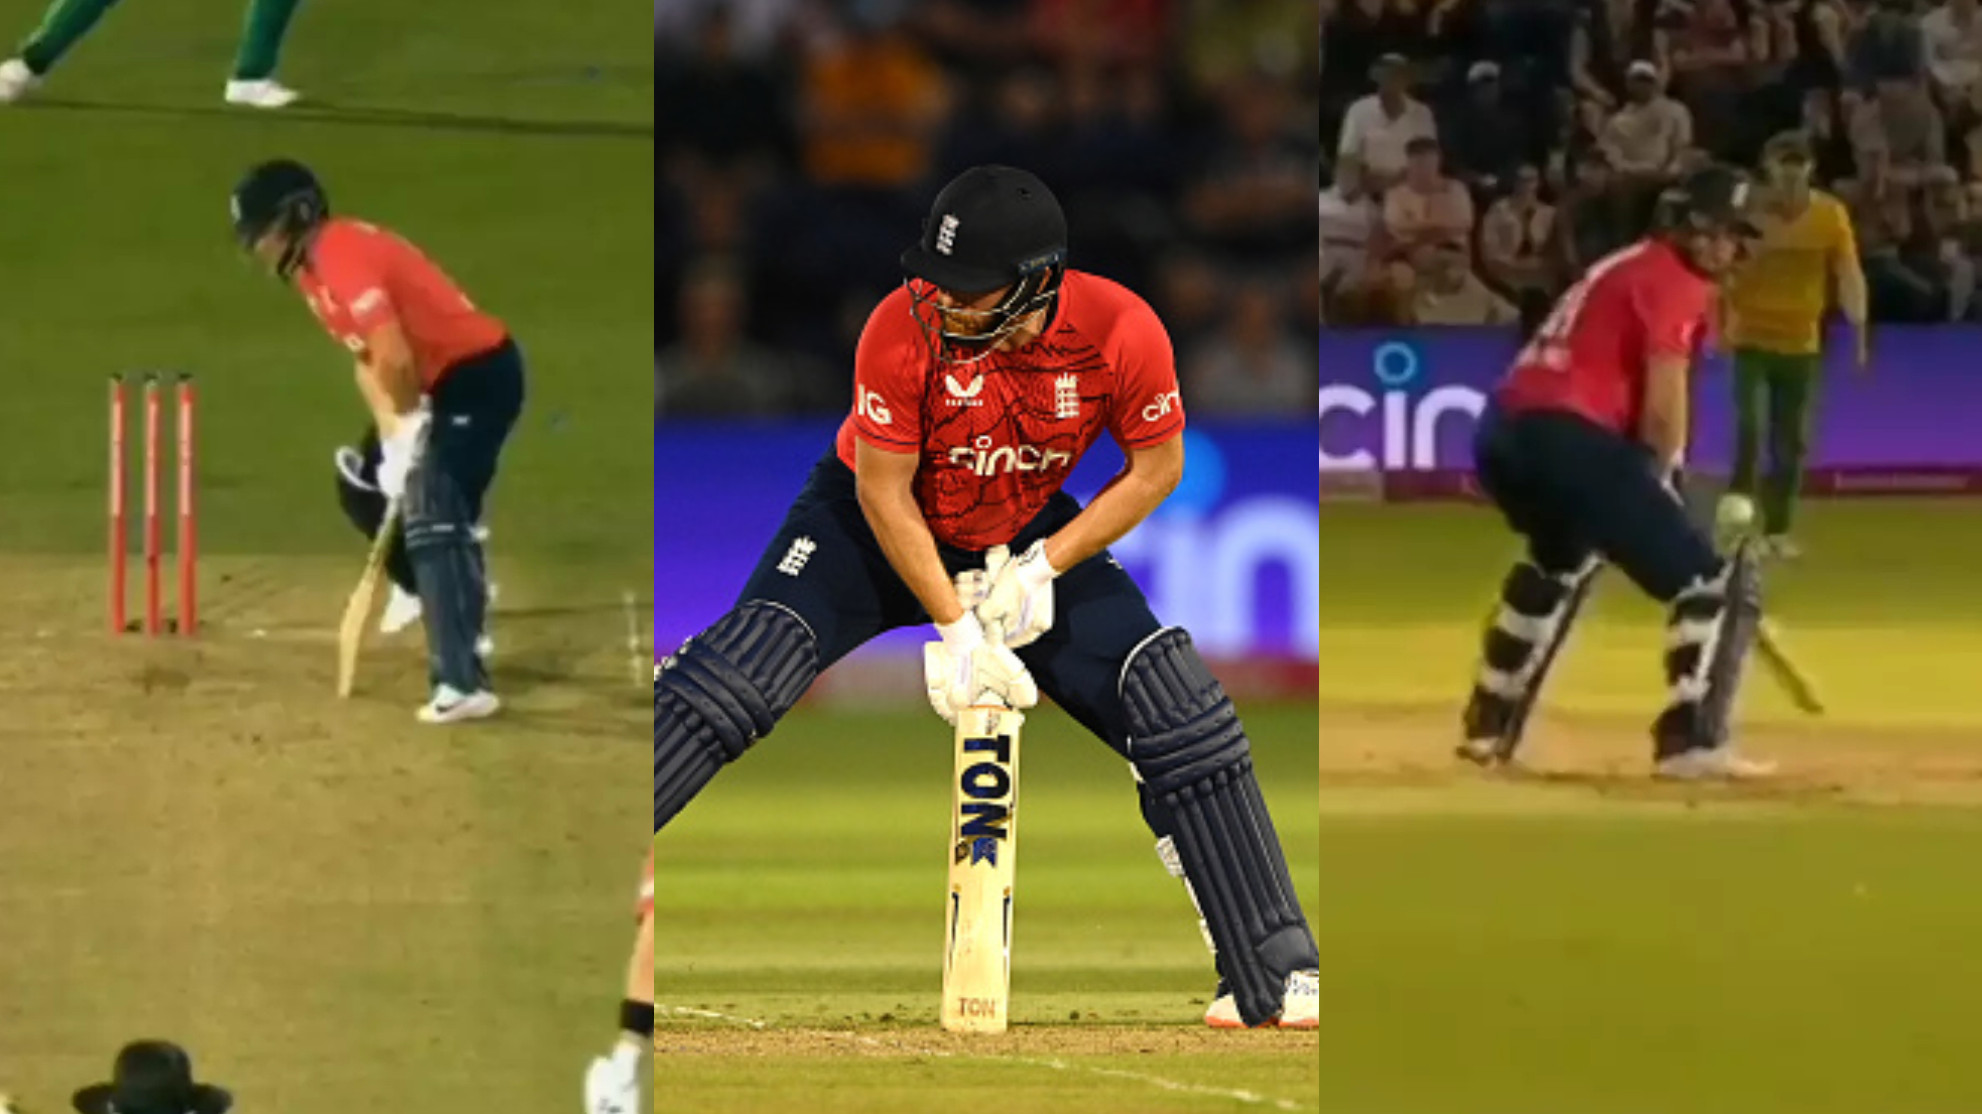 ENG v SA 2022: WATCH- Jonny Bairstow plays the unique ‘nutmeg’ shot in second T20I against South Africa